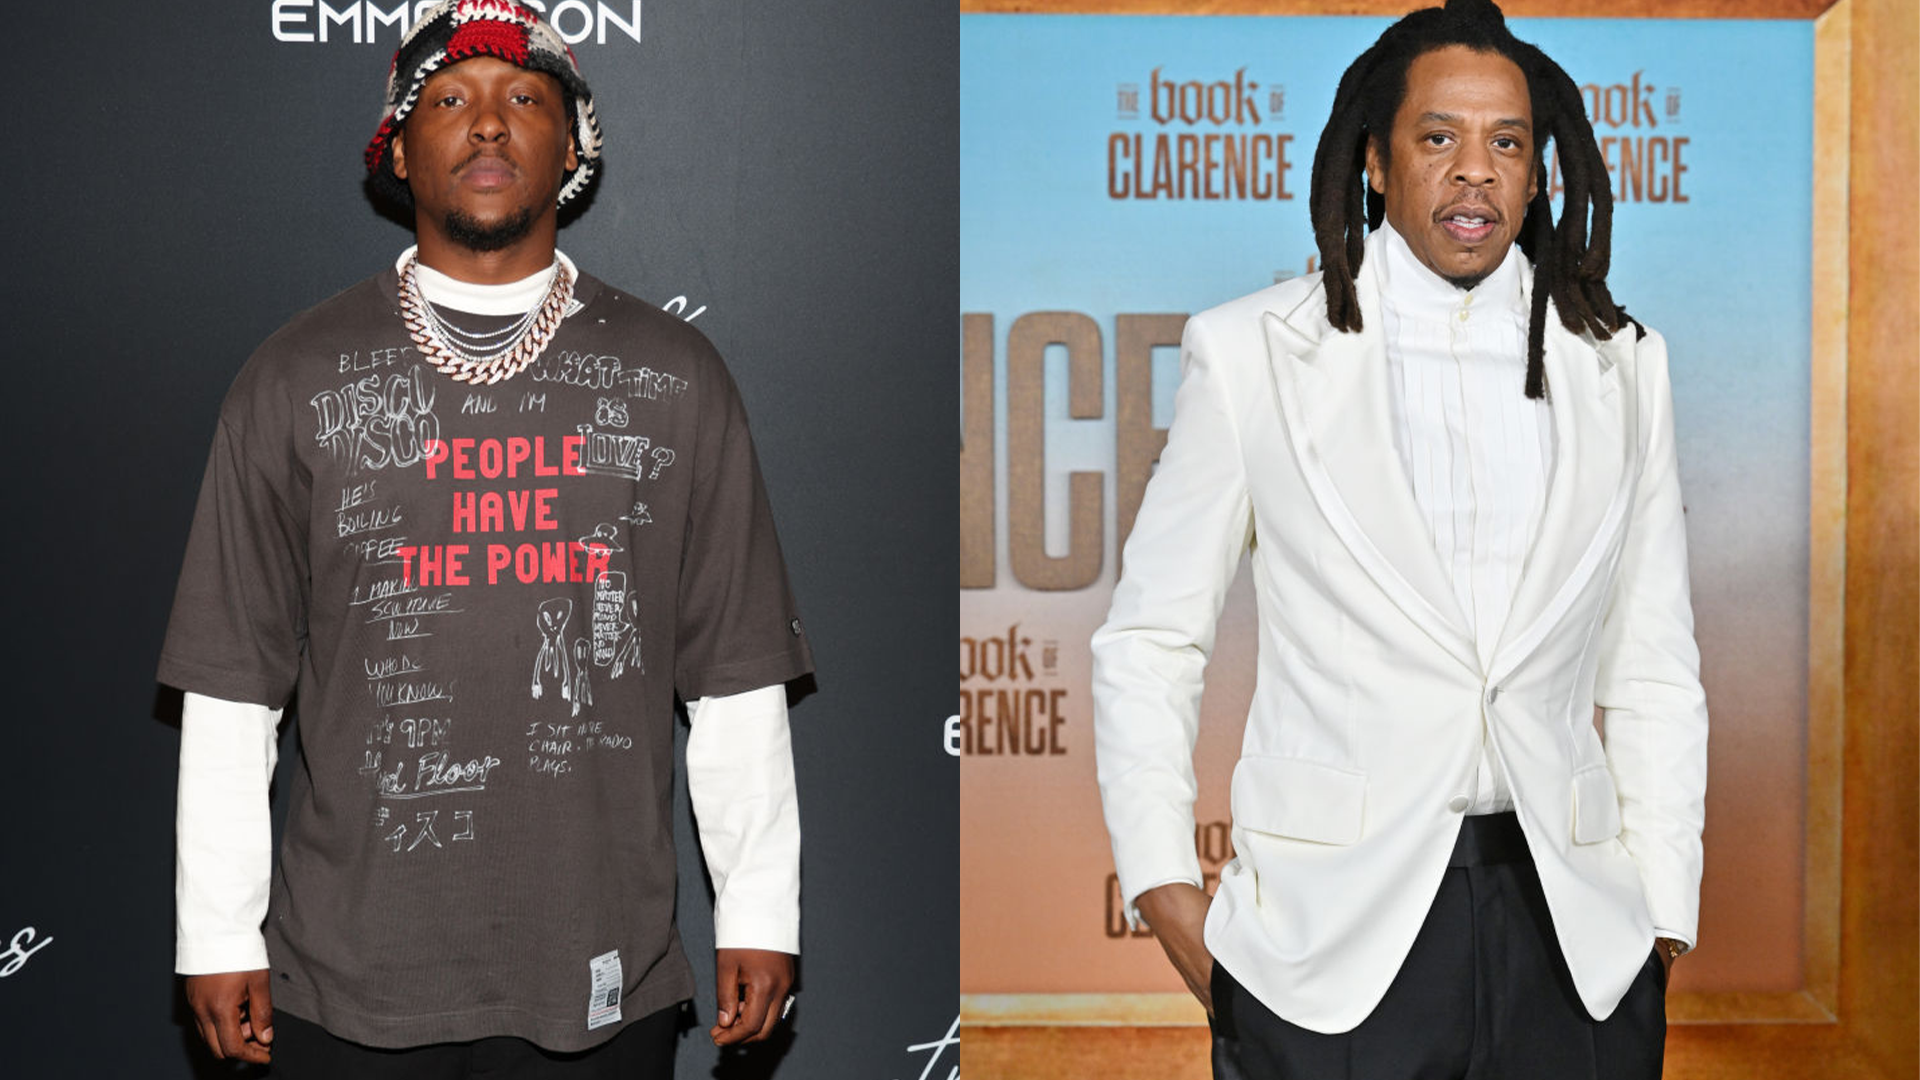 37-Year-Old Hit-Boy Thanks Jay-Z For Helping Him Get An End Date For The ‘Worst Publishing Contract,’ Which He’s Had Since Age 19